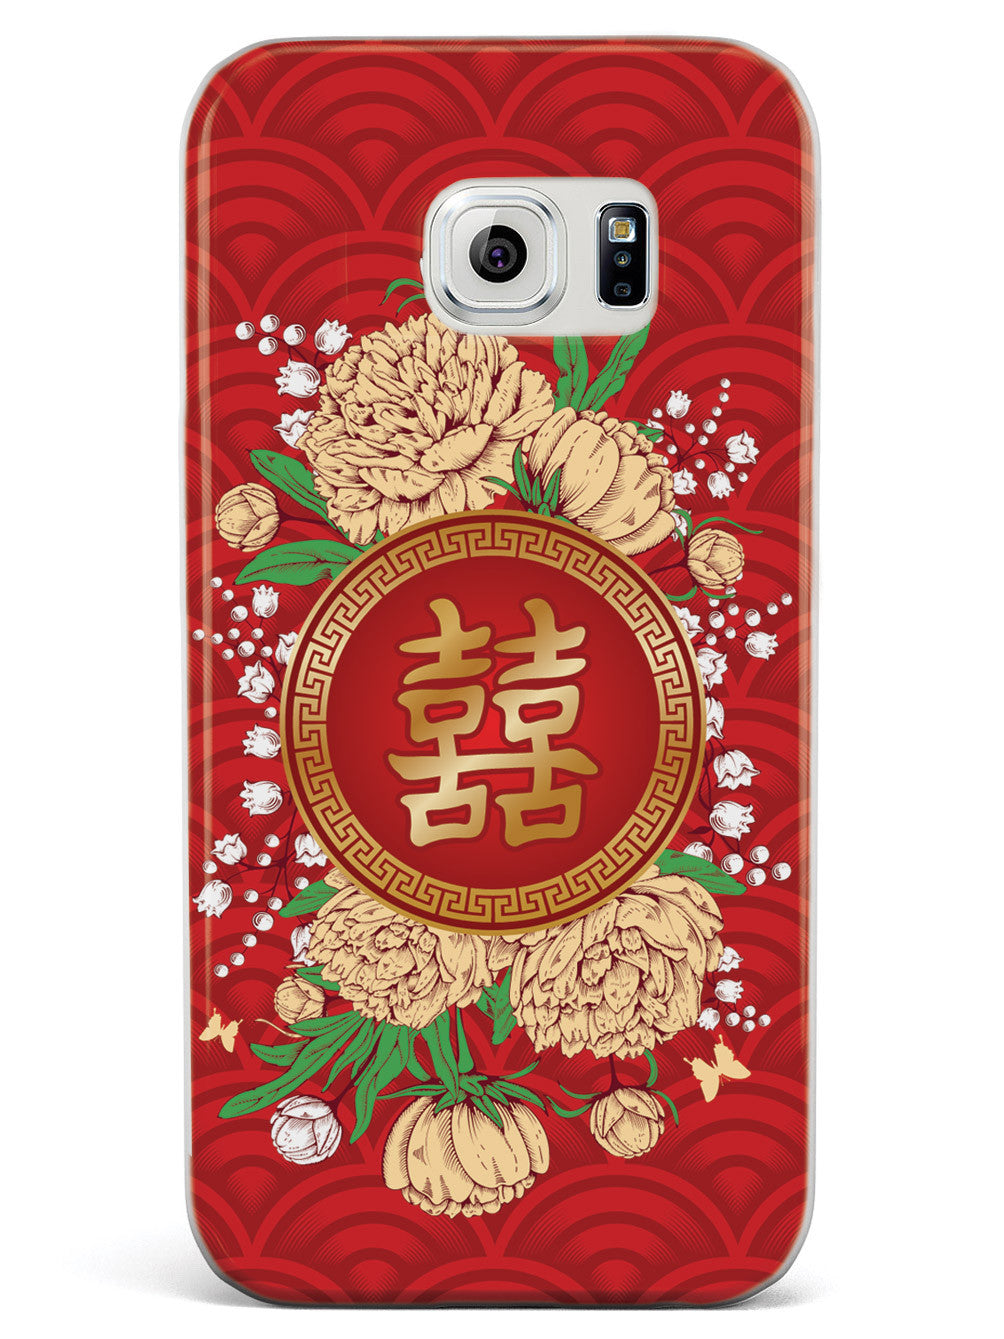 Chinese New Year - Floral Red Envelope - White Case